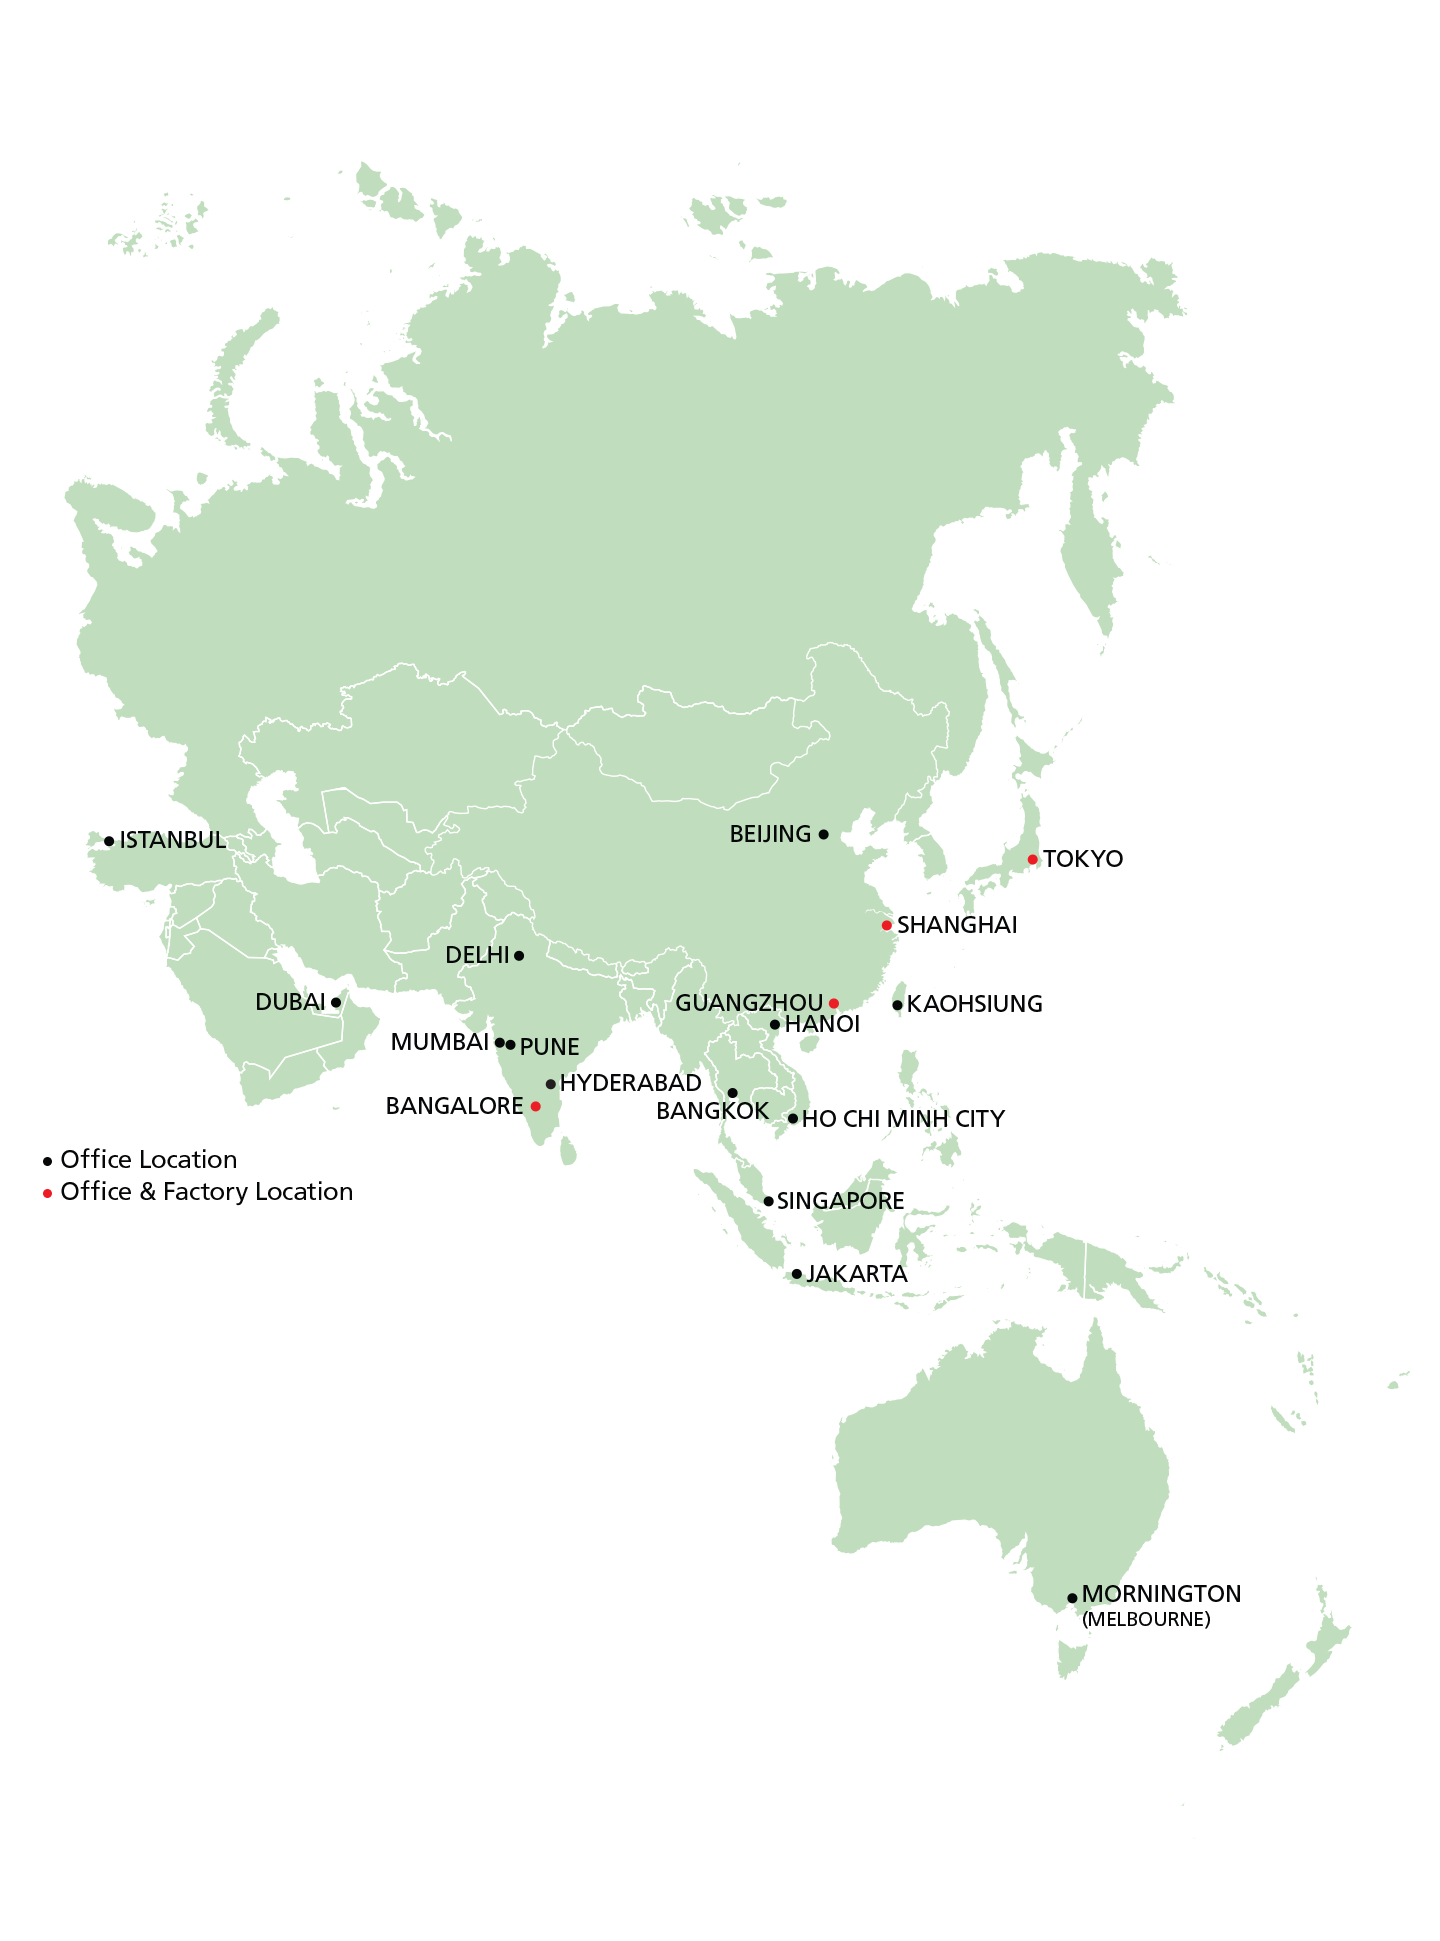 TMEIC locations in Asia and Australia